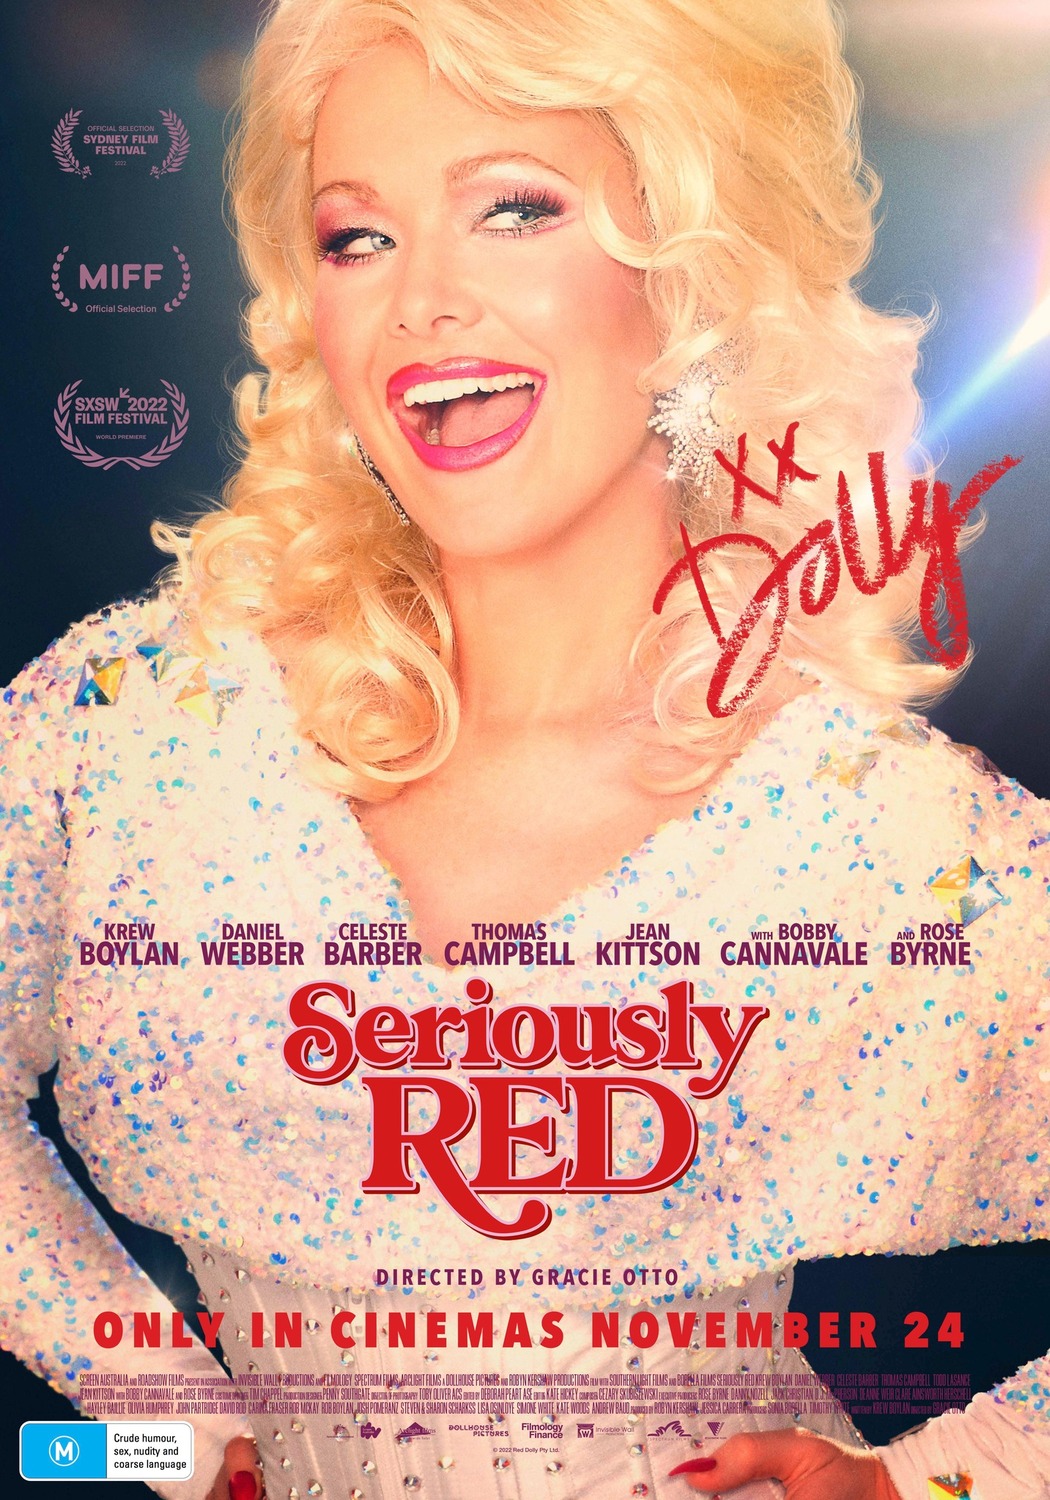 Extra Large Movie Poster Image for Seriously Red 